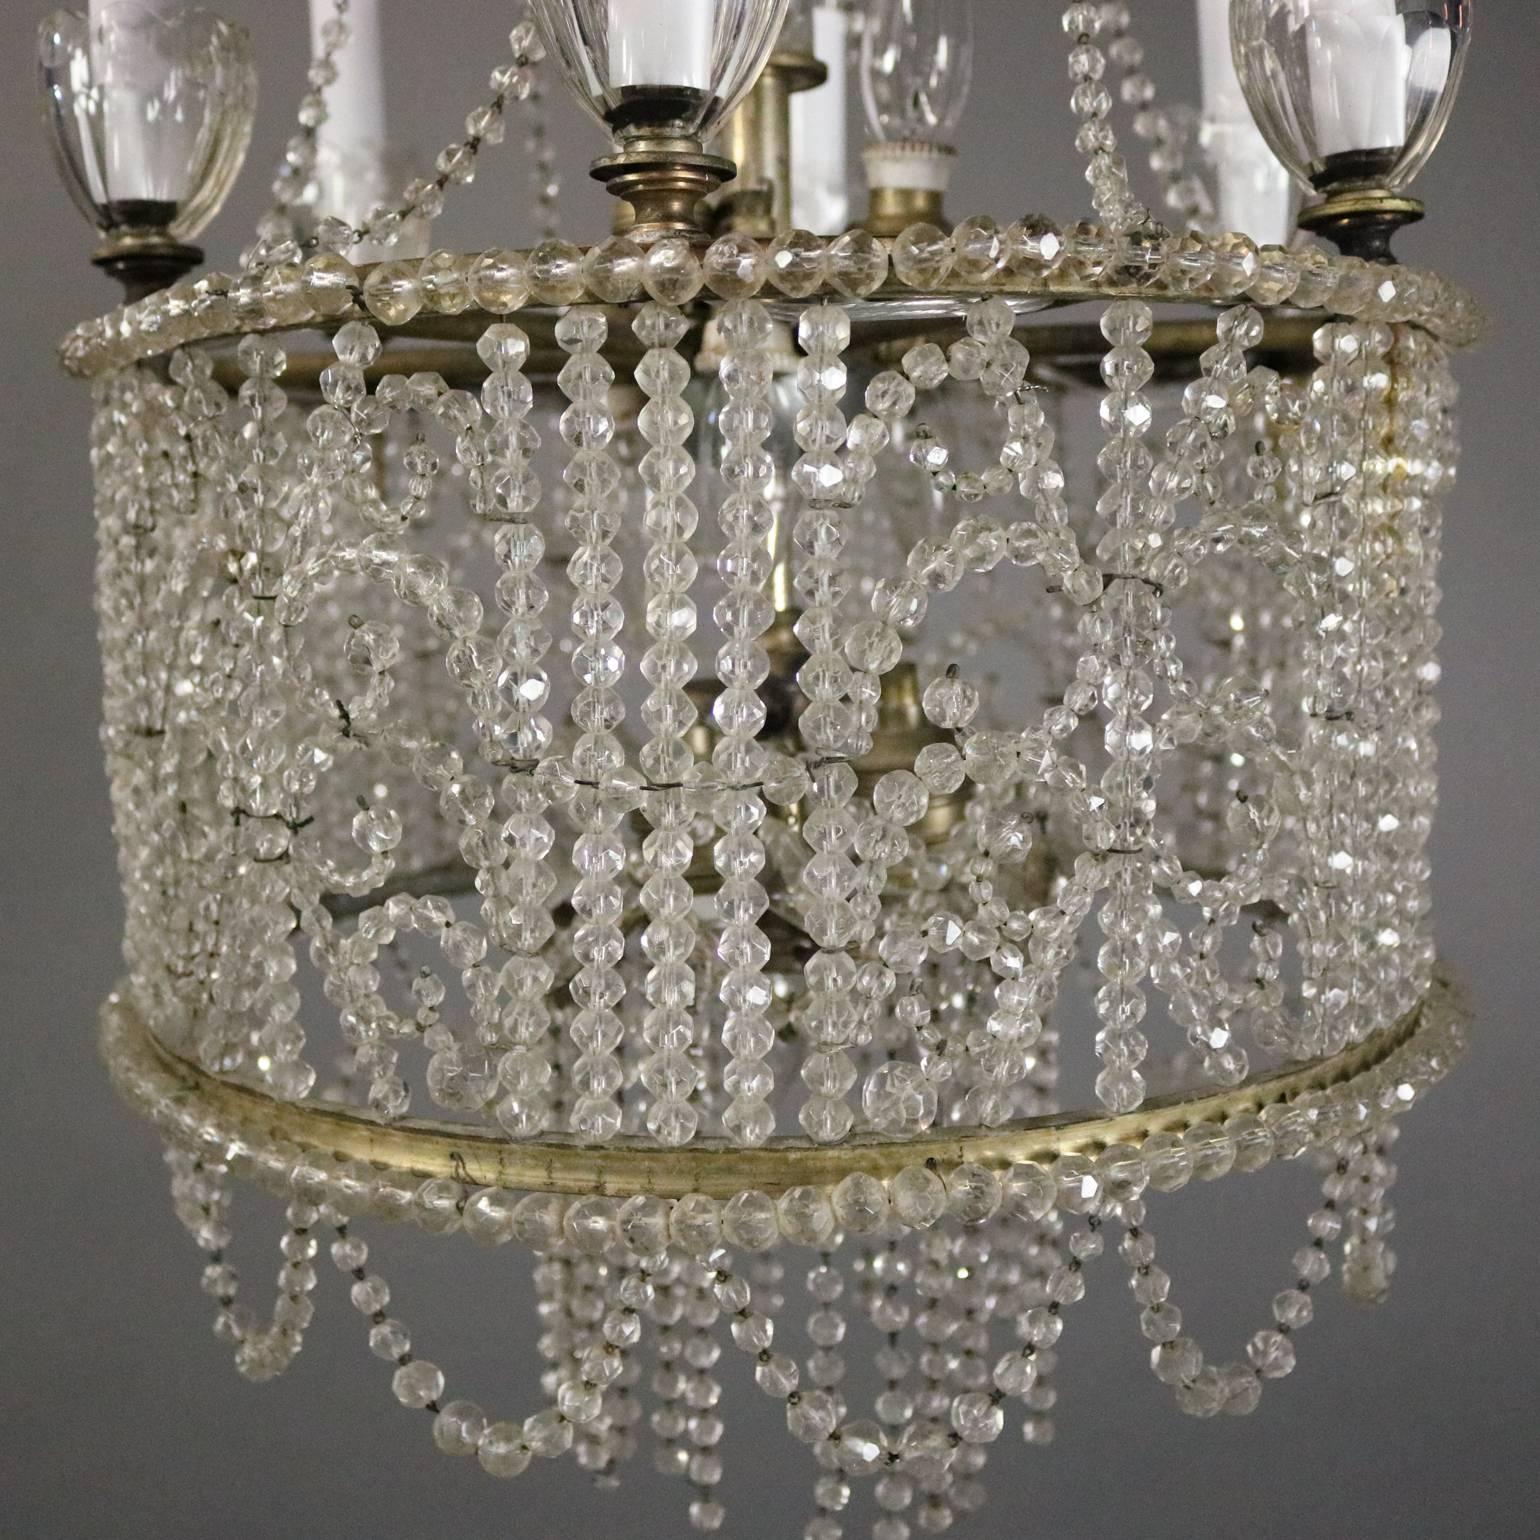 Antique French Art Nouveau Crystal Bead Wedding Cake Style Chandelier 4